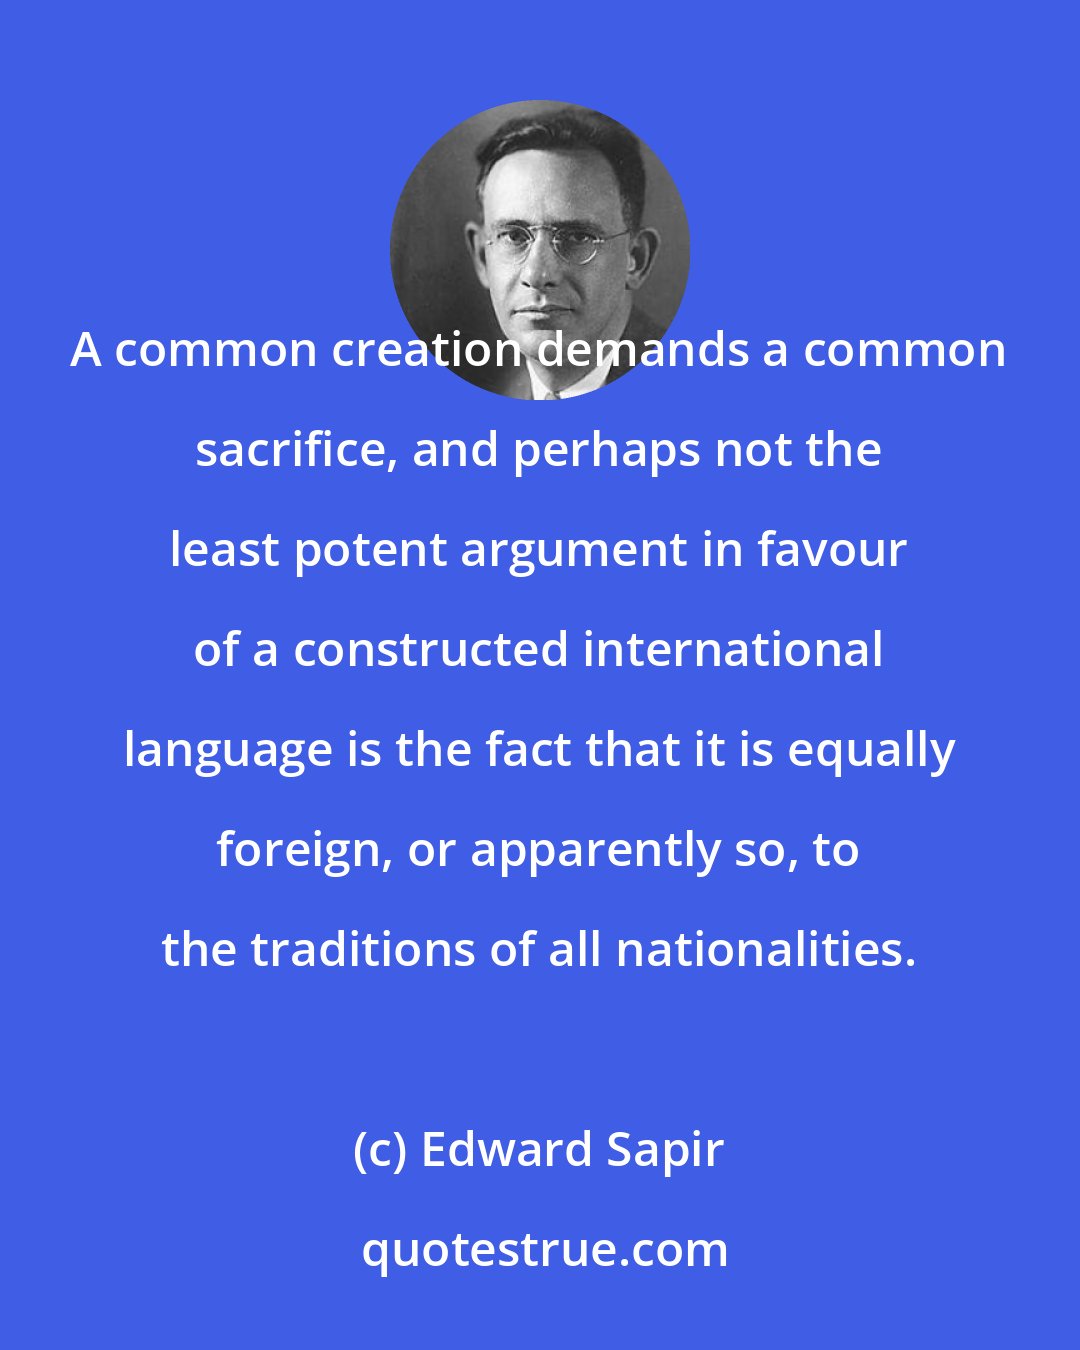 Edward Sapir: A common creation demands a common sacrifice, and perhaps not the least potent argument in favour of a constructed international language is the fact that it is equally foreign, or apparently so, to the traditions of all nationalities.